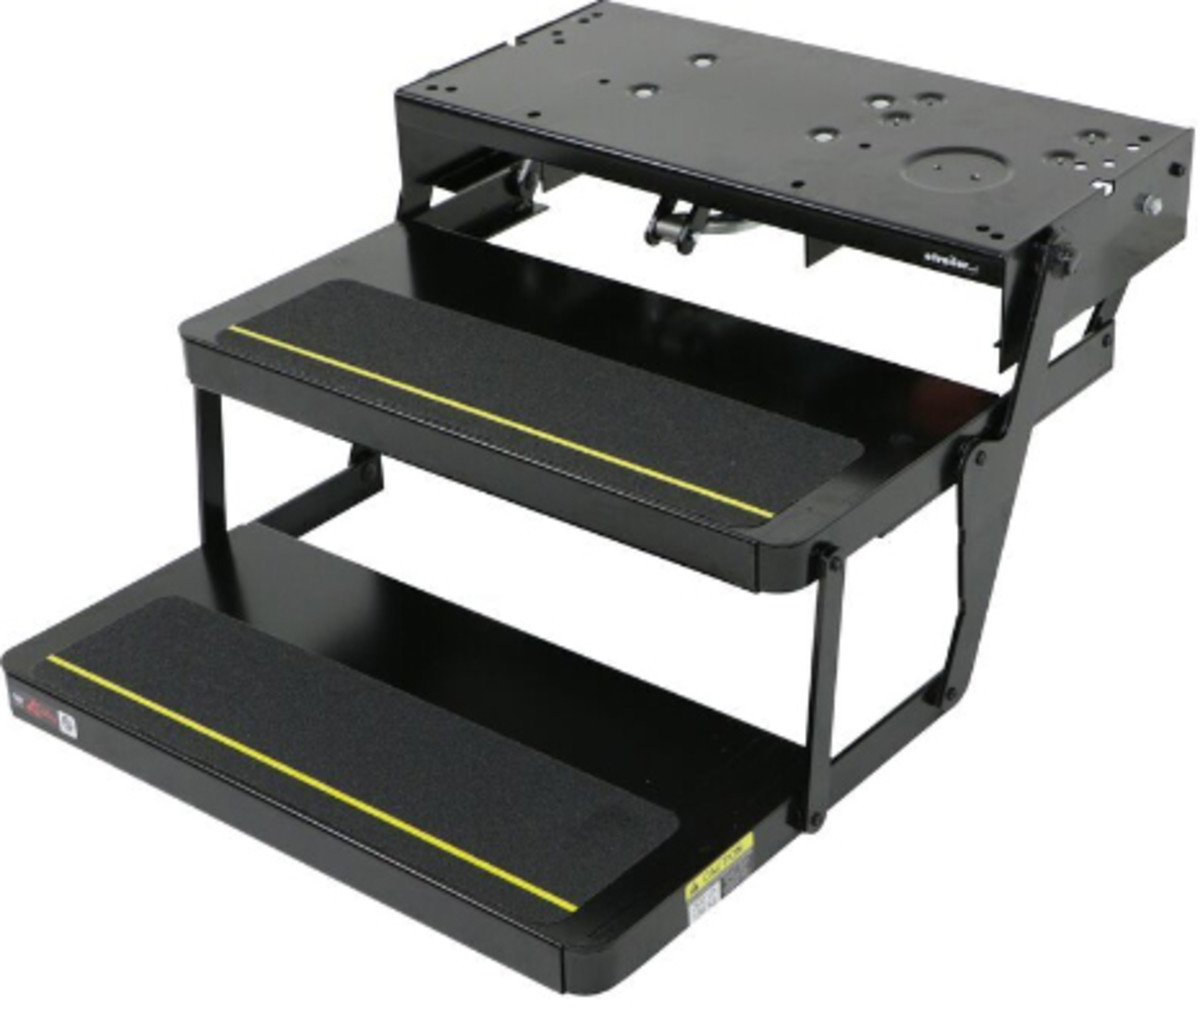 RV steps: A standard two-step powered entrance step assembly.